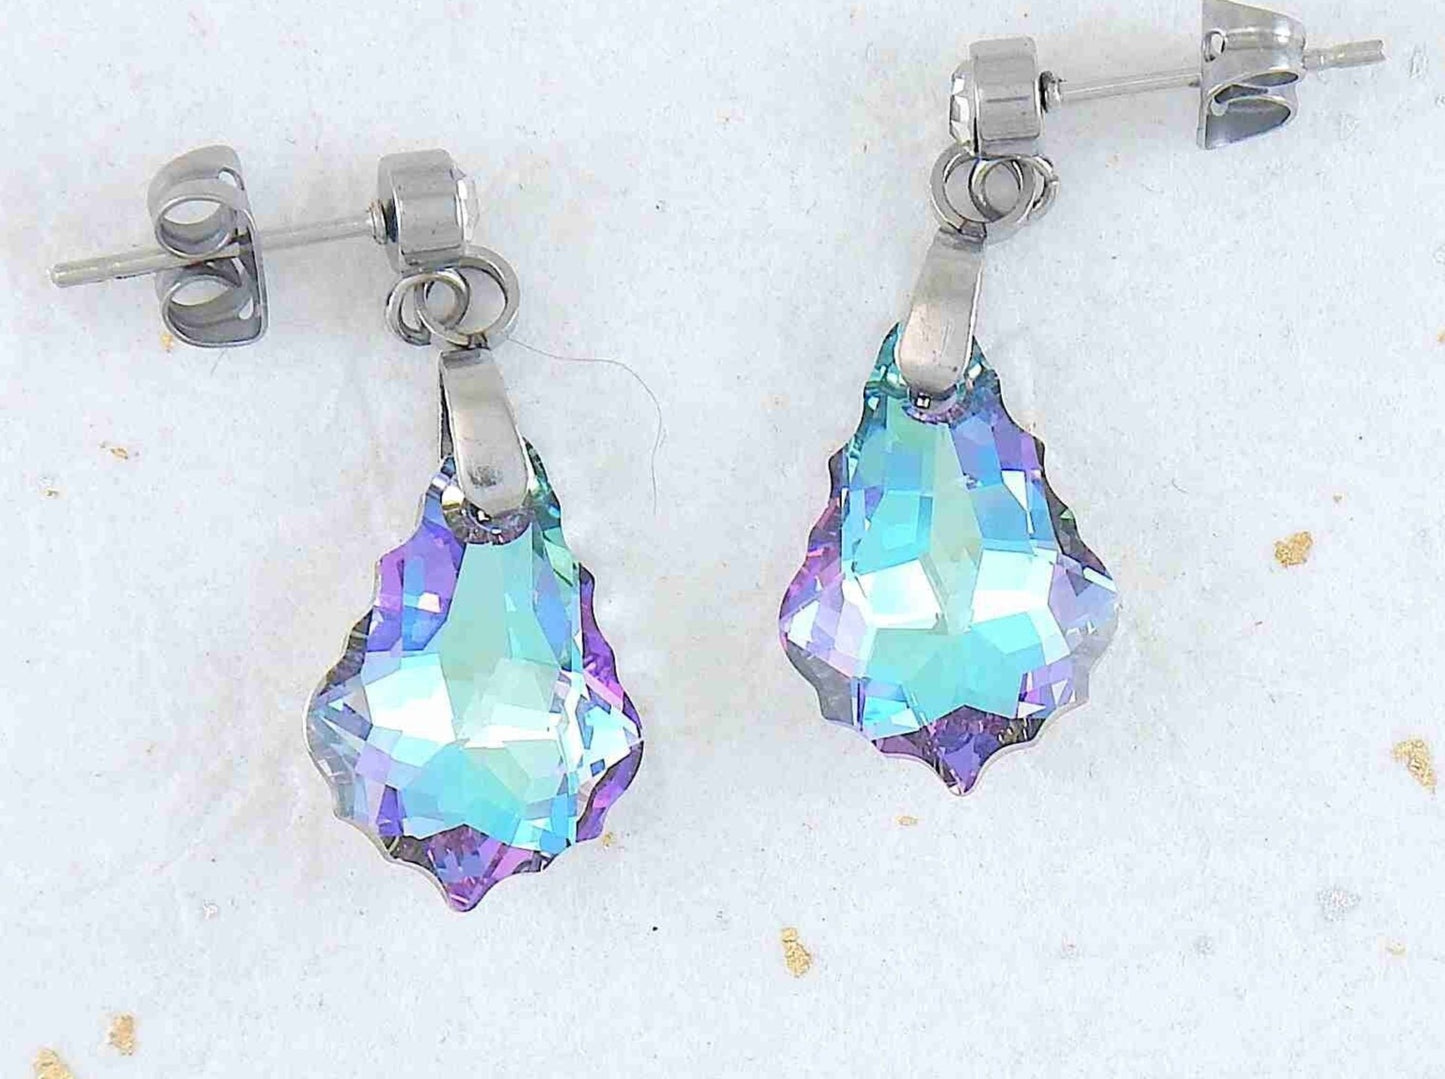 Short earrings with 16mm Vitrail Light (blue/lilac) baroque Swarovski crystals, stainless steel studs with tiny clear crystals